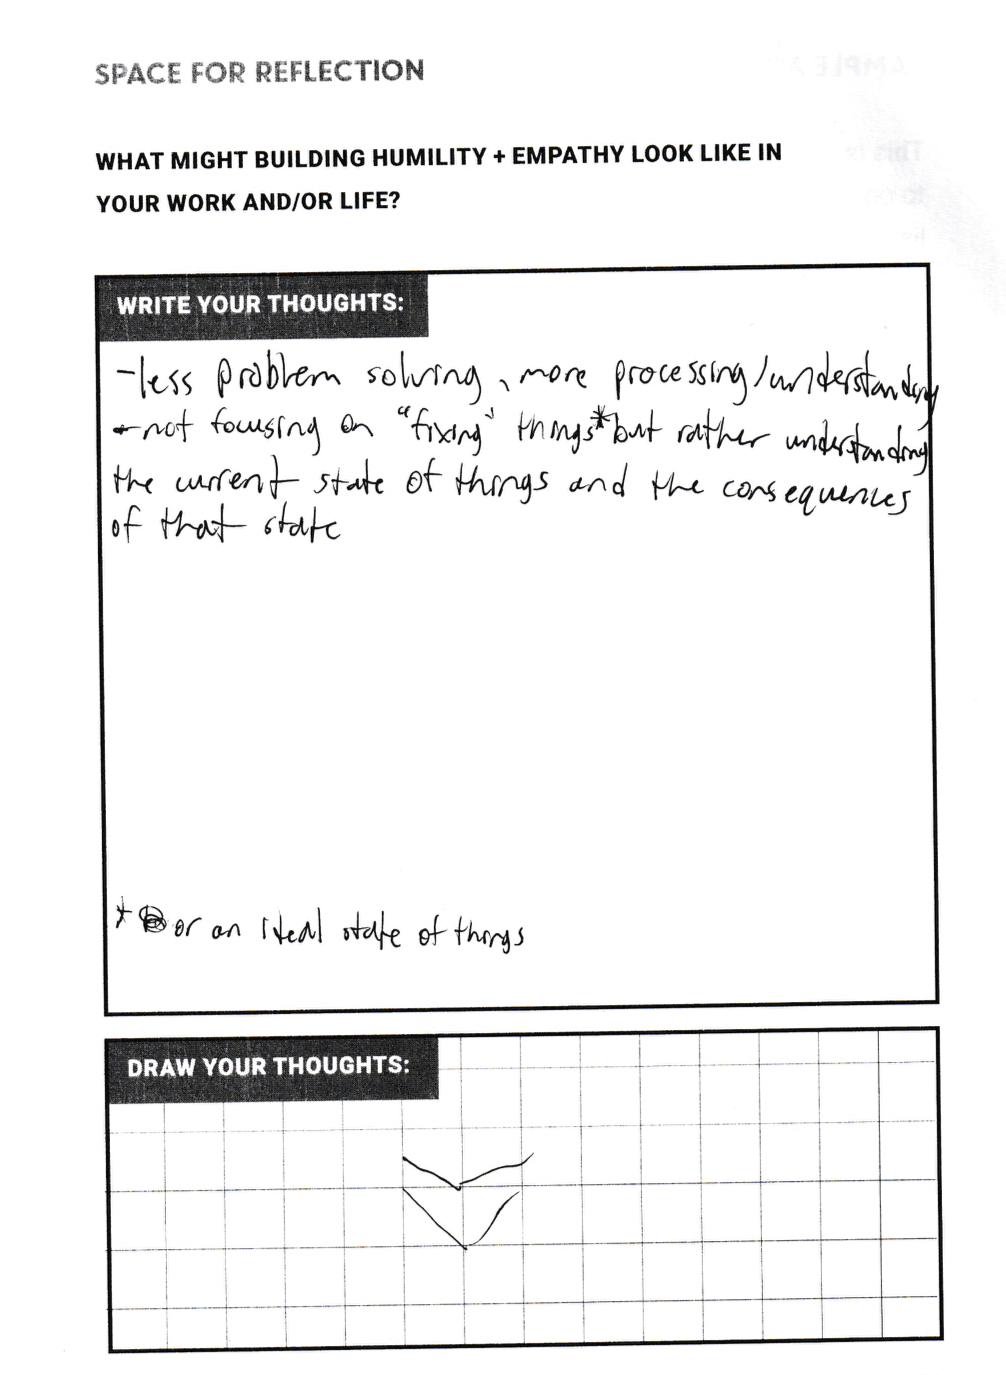 Image 4 - This image is of a handwritten worksheet from the ECCD exercise, "What Building Humility and Empathy looks like in your work and life?" written by Vikki Klein. It reads, “Less problem solving, more processing/understanding. Not focusing on “fixing things” but rather understanding the current state of things and the consequences of that state.”